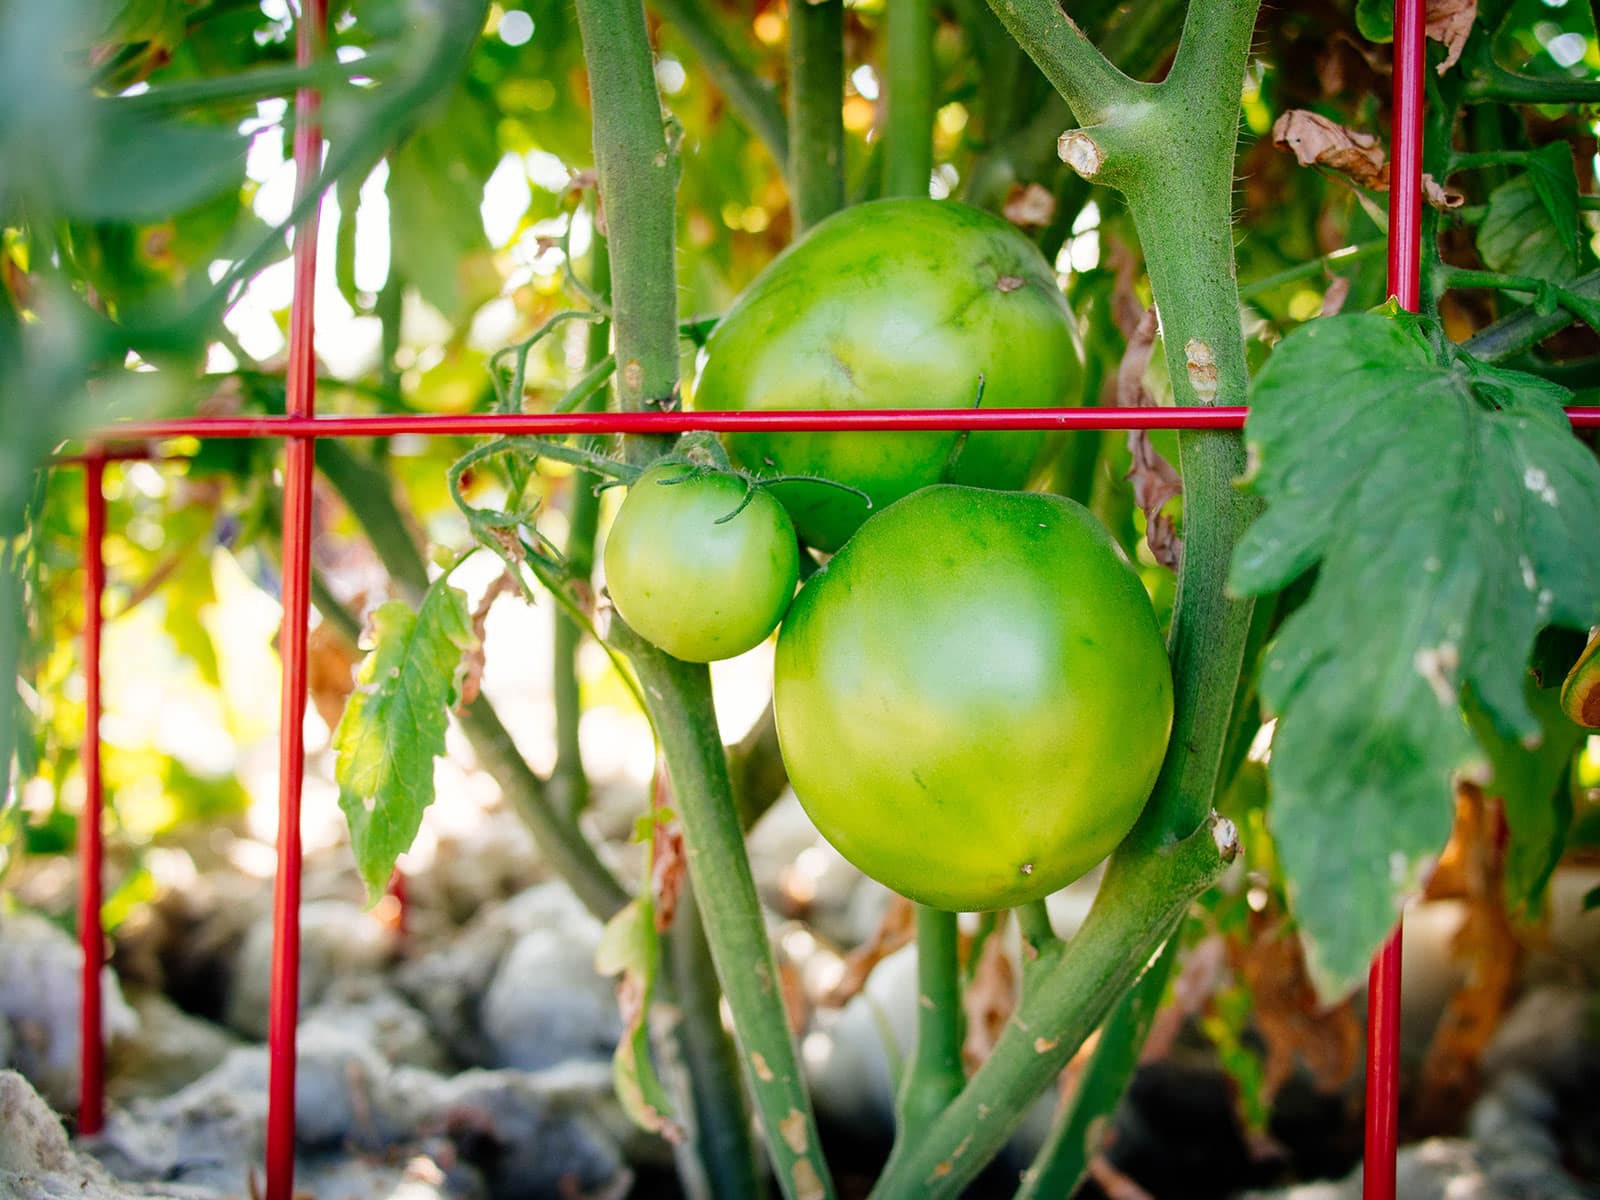 Green unripe tomatoes growing inside a red tomato cage with sheep wool mulch on the soil